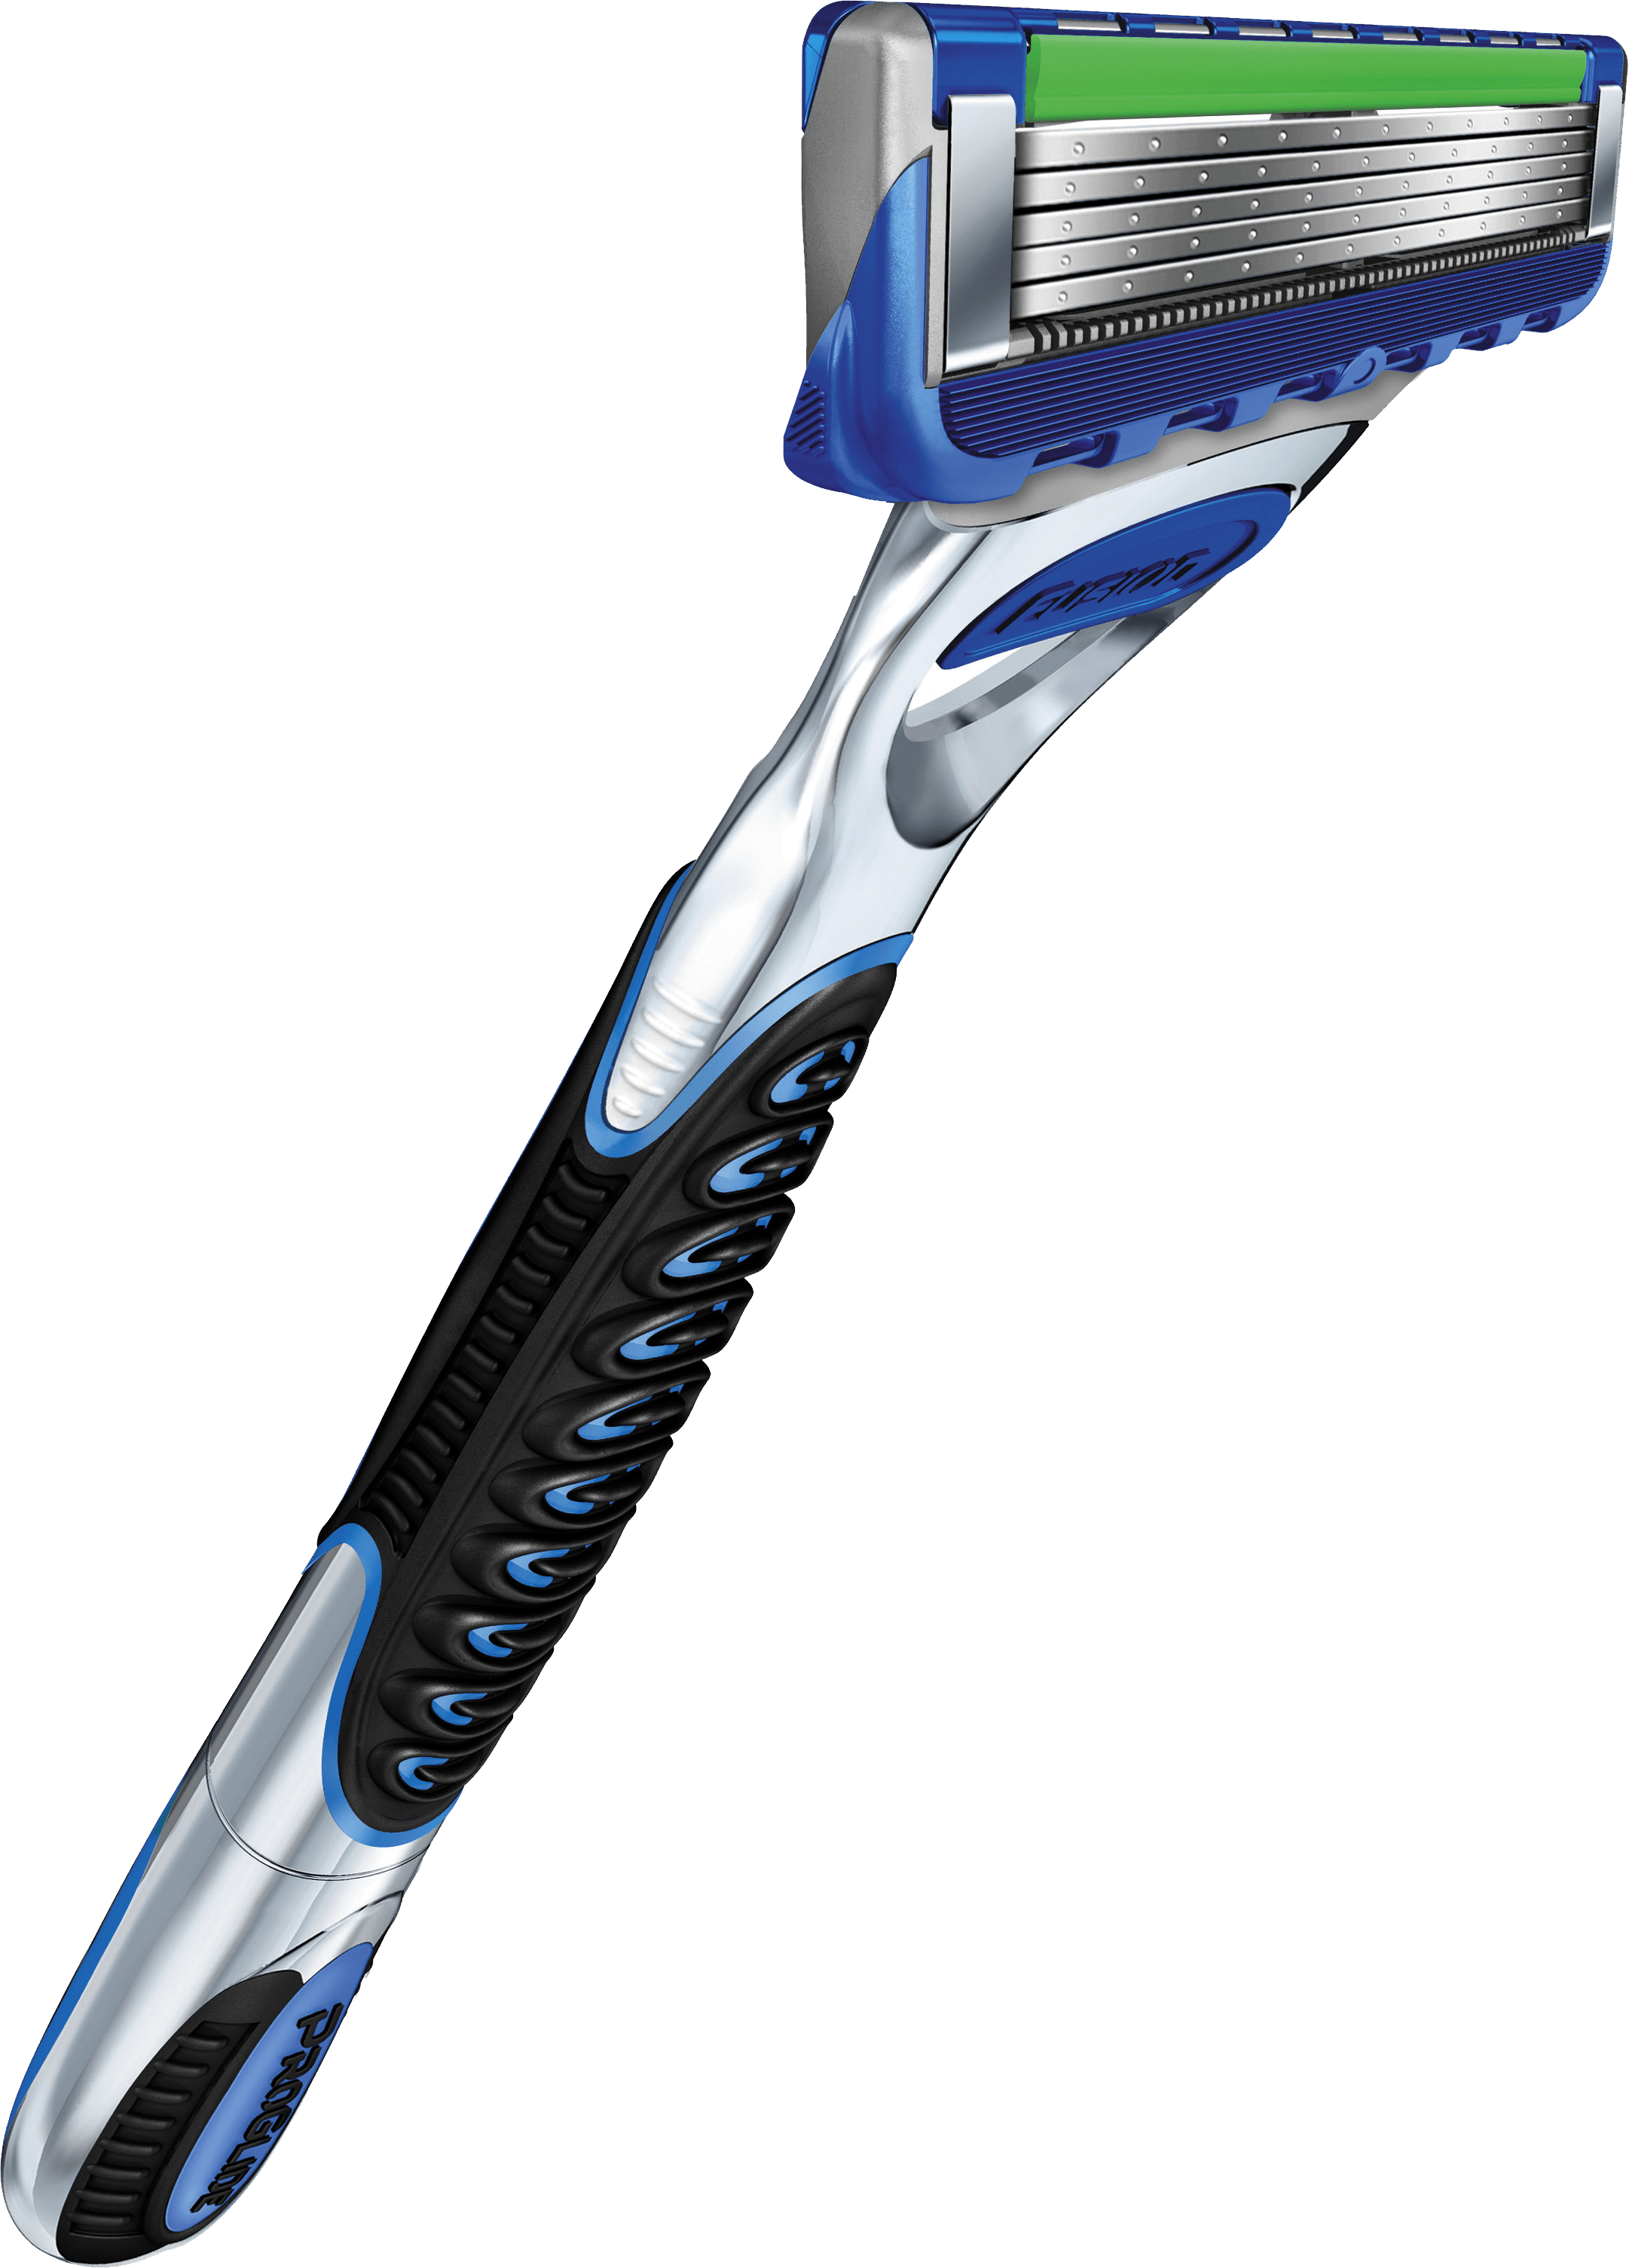 Electric Razor Background PNG Image